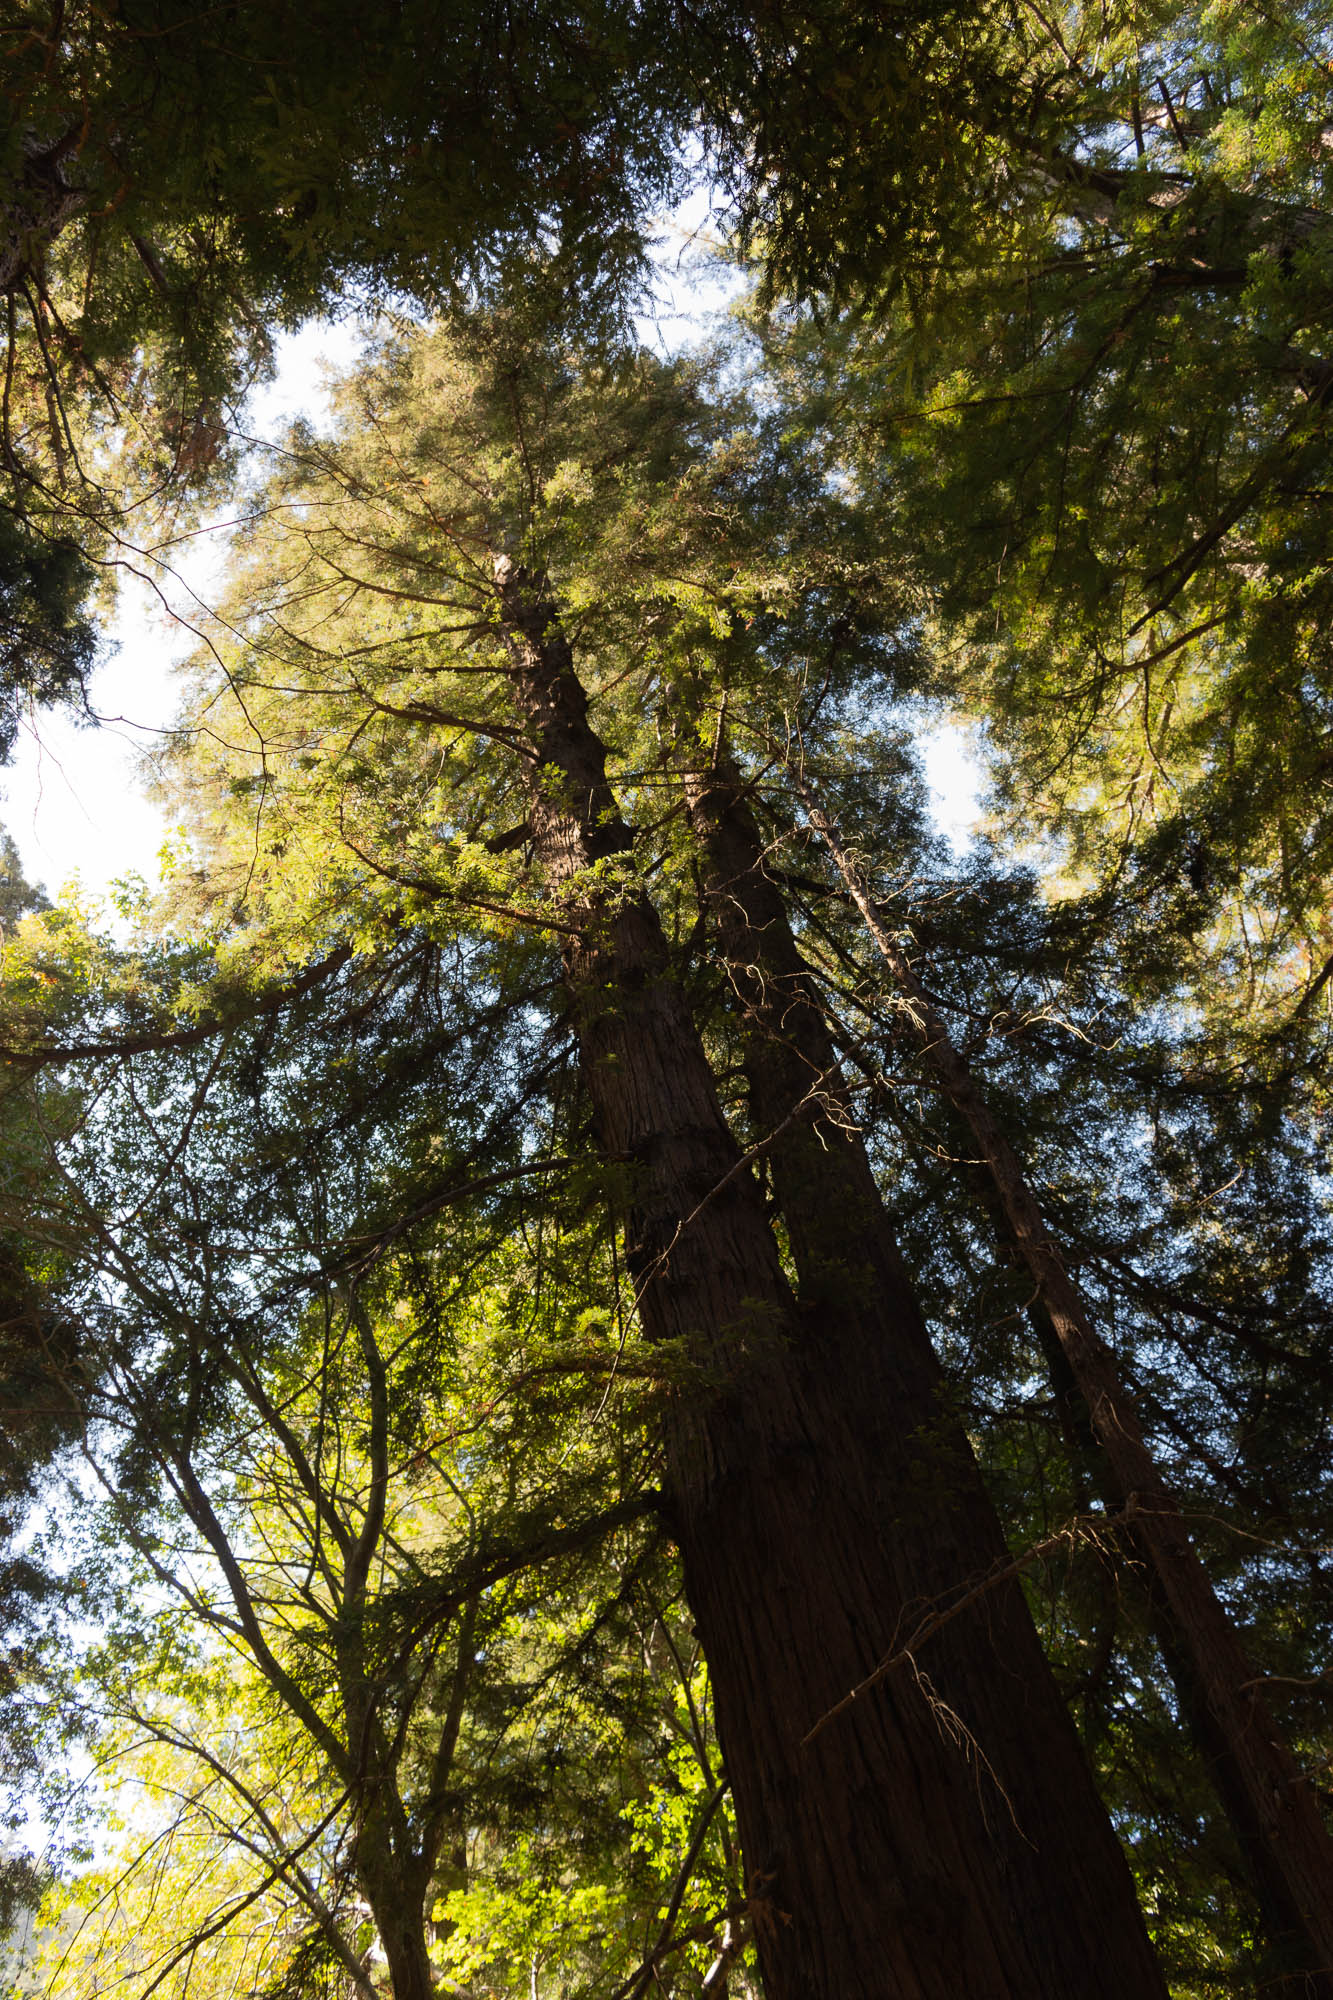 With plenty of water, these trees at the Pfeiffer Big Sur State Park are abundant.